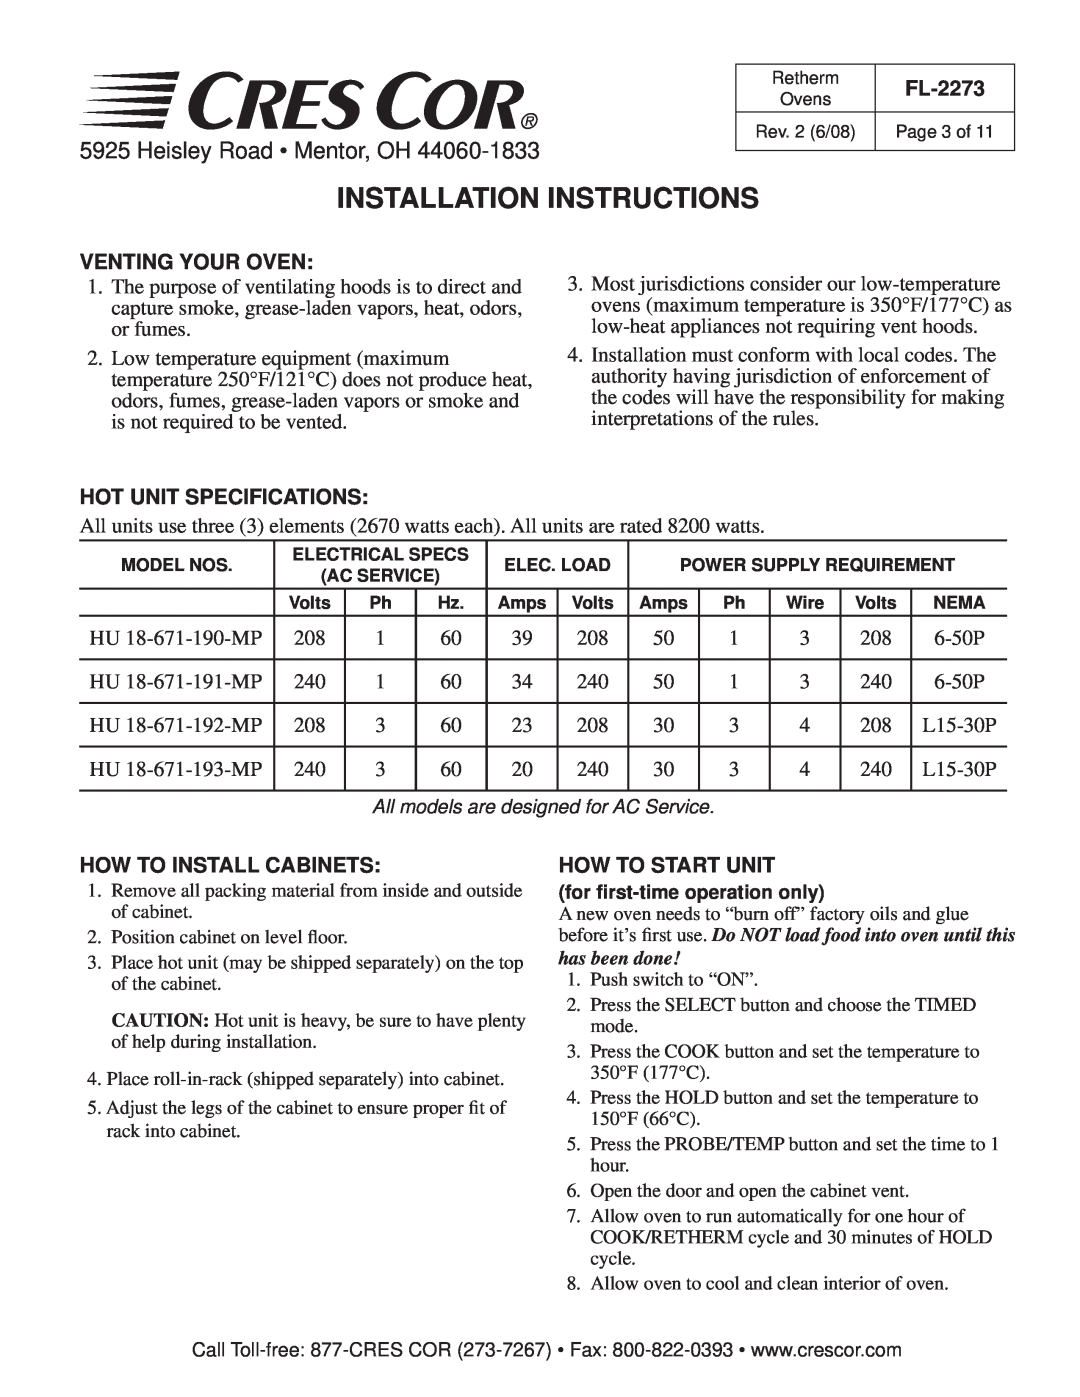 Cres Cor RR-1332 Series Retherm Ovens manual Installation Instructions, Heisley Road Mentor, OH, FL-2273, Venting Your Oven 